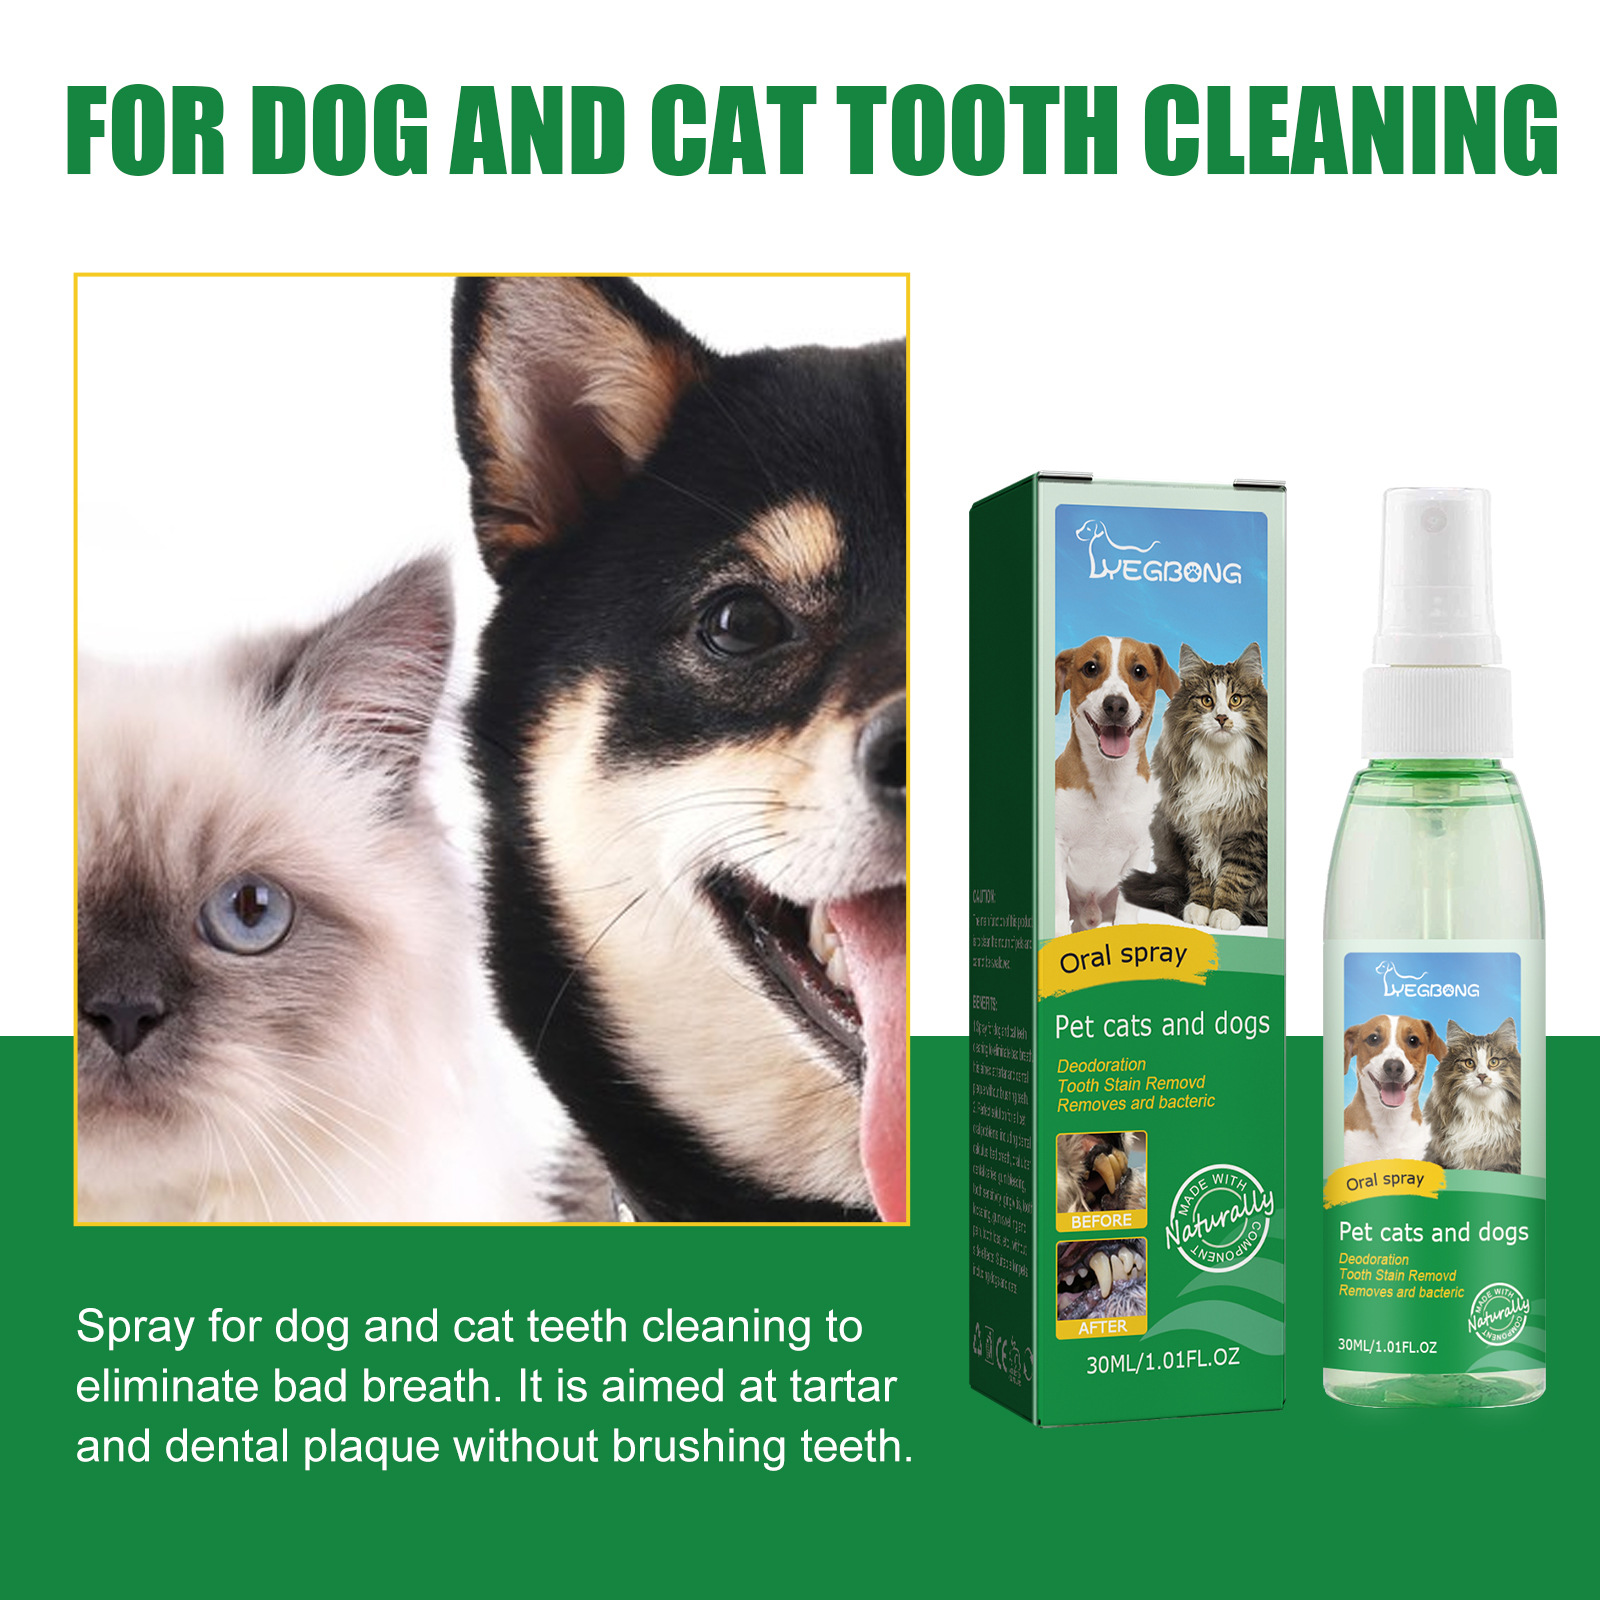 Yegbong Pet Teeth Cleaning Spray Dog Cat Cleaning Tooth Stains Cleaning Spray